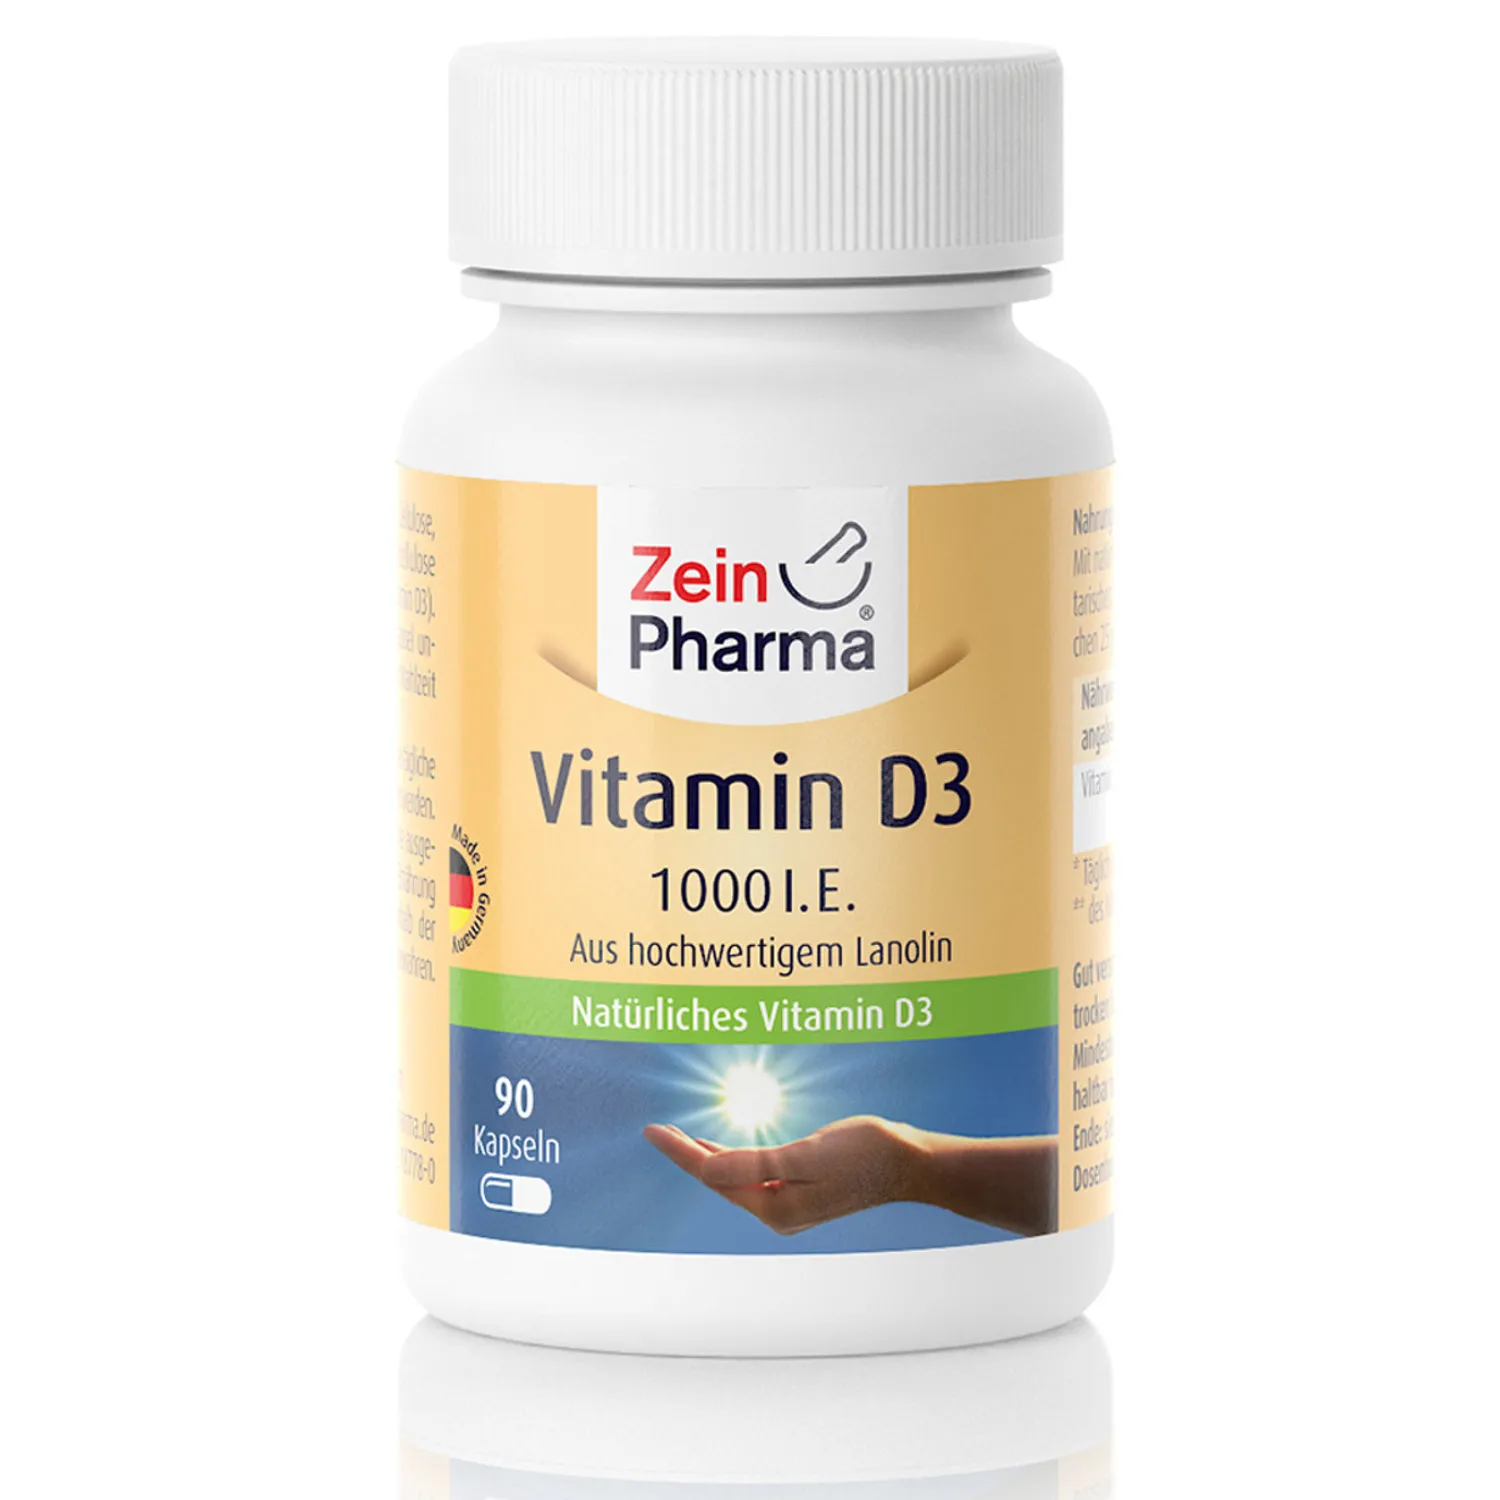 Germany Manufacturers Sports Food Vitamin D Supplements Made In Germany Buy Supplements Made In Germanysupplements Foodsports Supplements